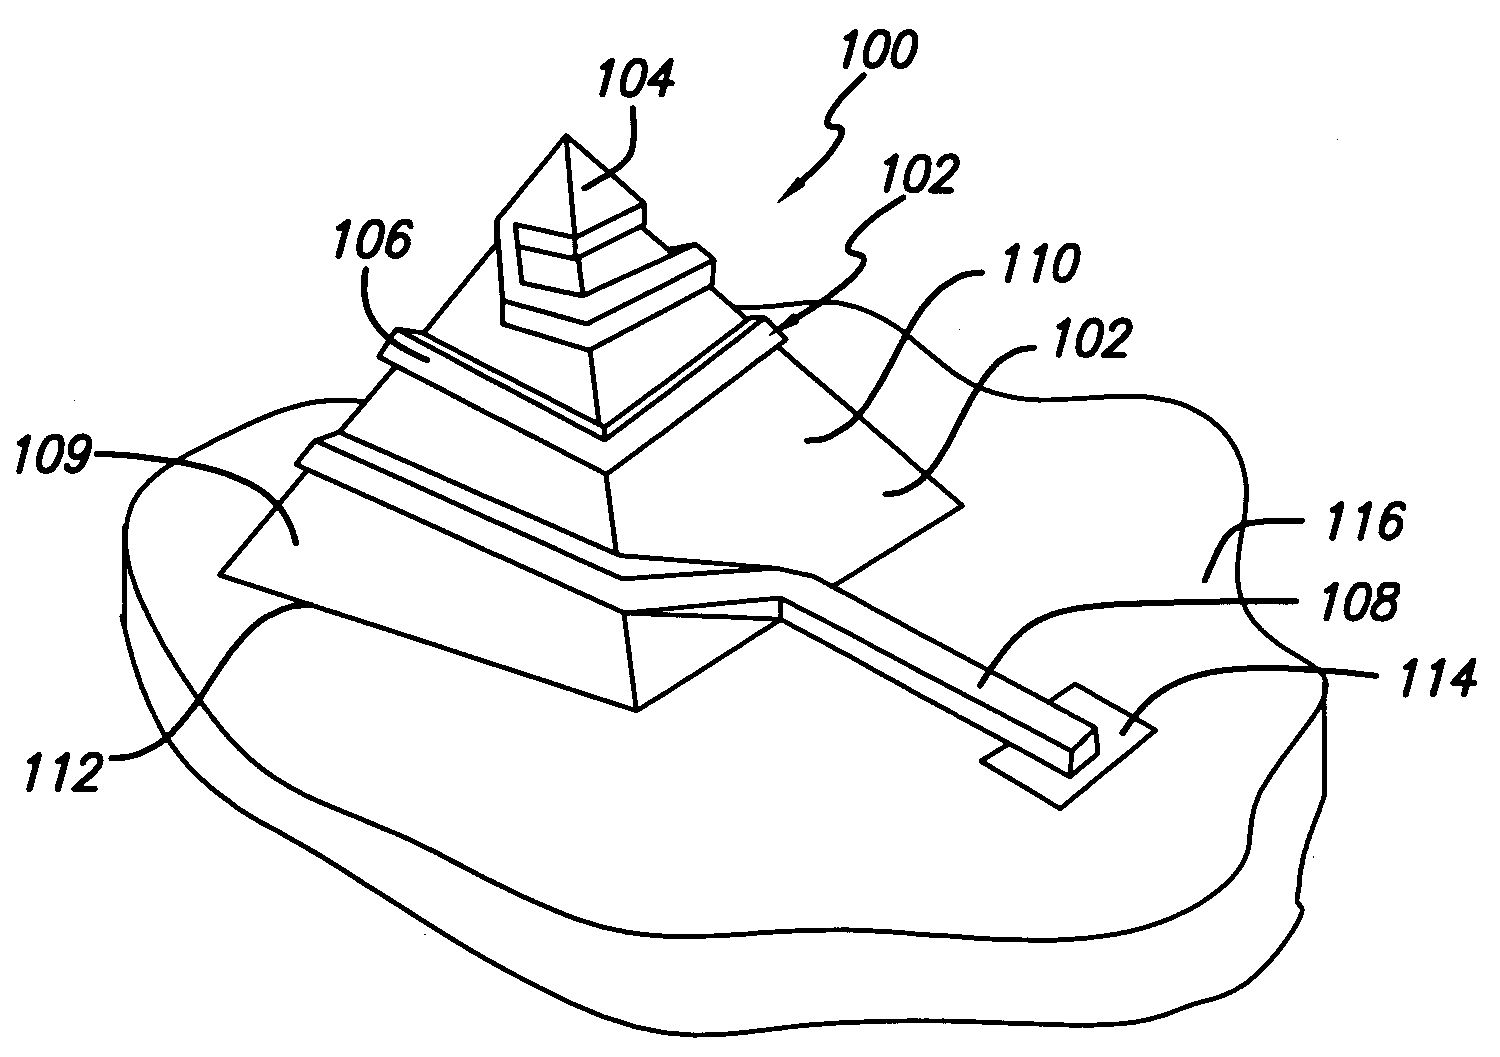 Helical microelectronic contact and method for fabricating same